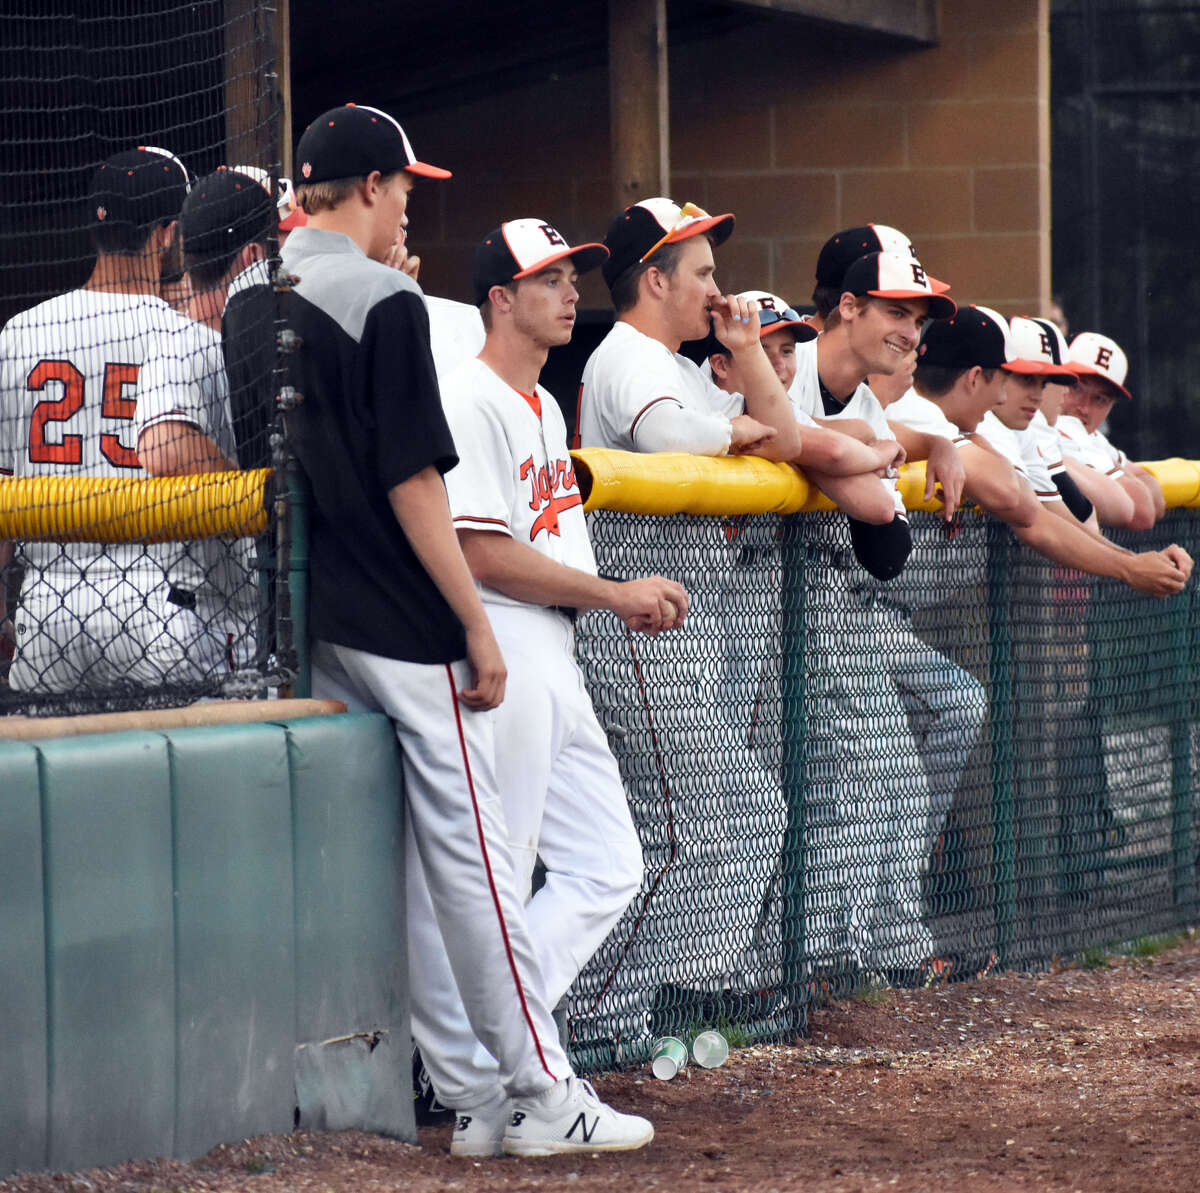 The EHS bench watches as the Tigers close out a 4-2 win over Waterloo on Monday at EHS.